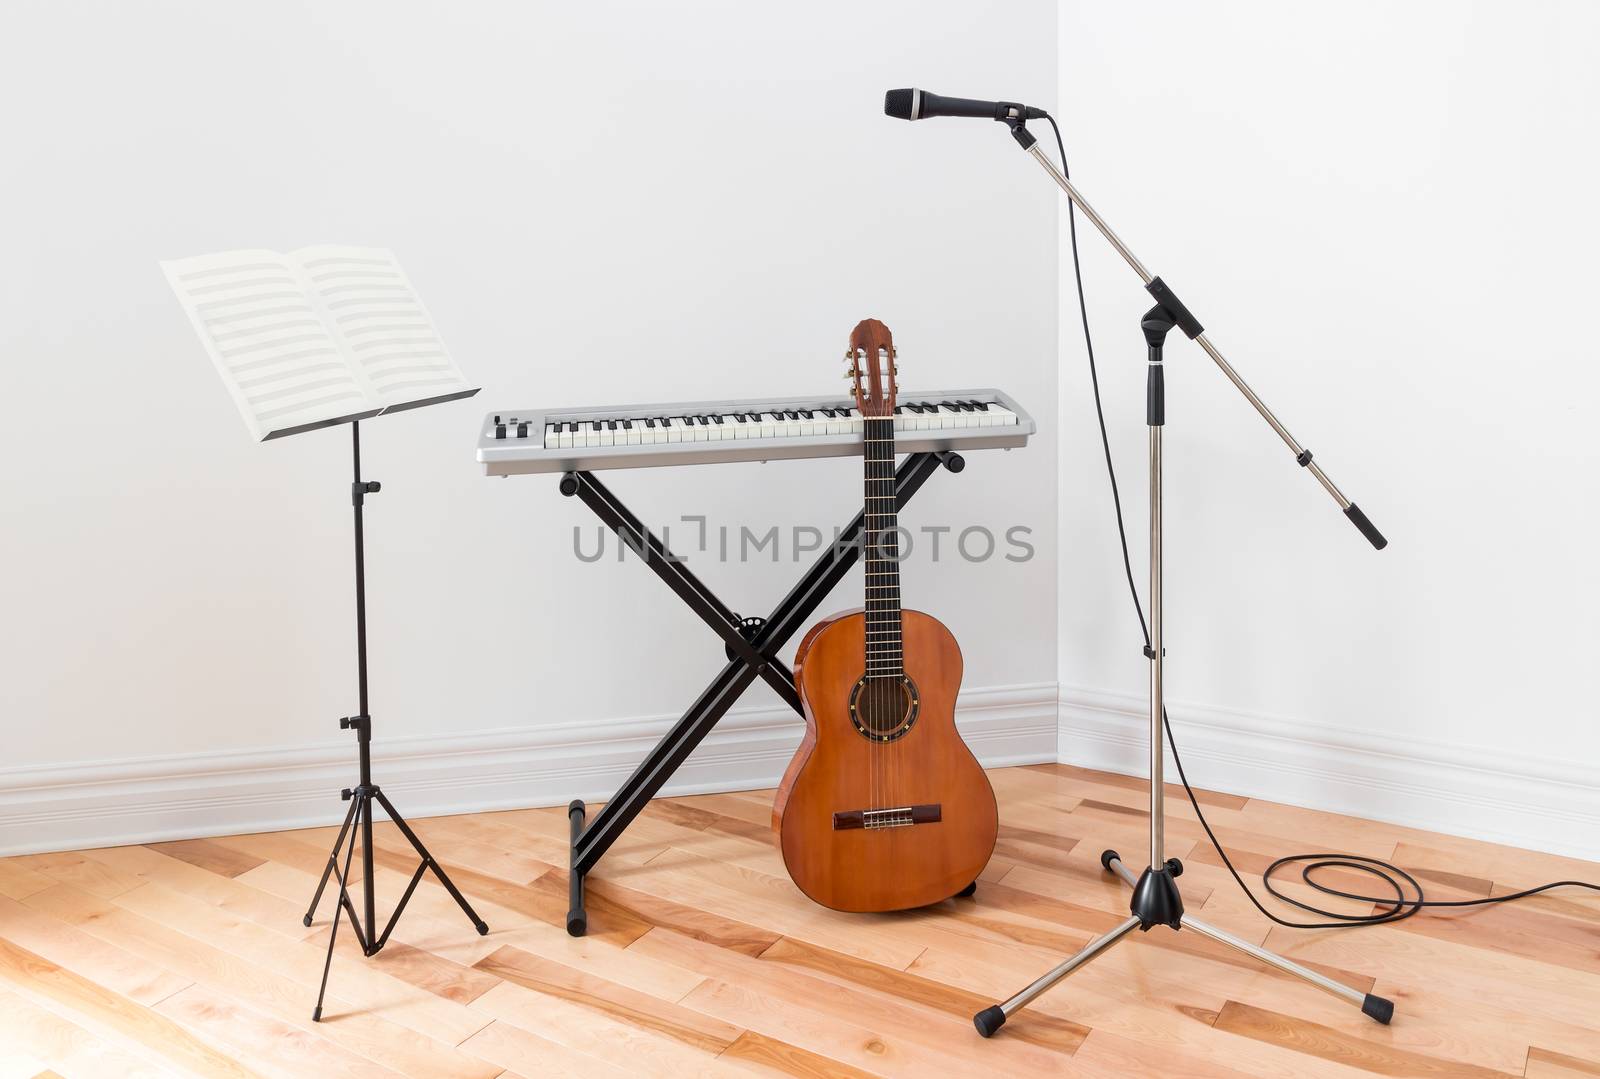 Musical instruments in a room. Electric piano, guitar, microphone and stand with sheet music.